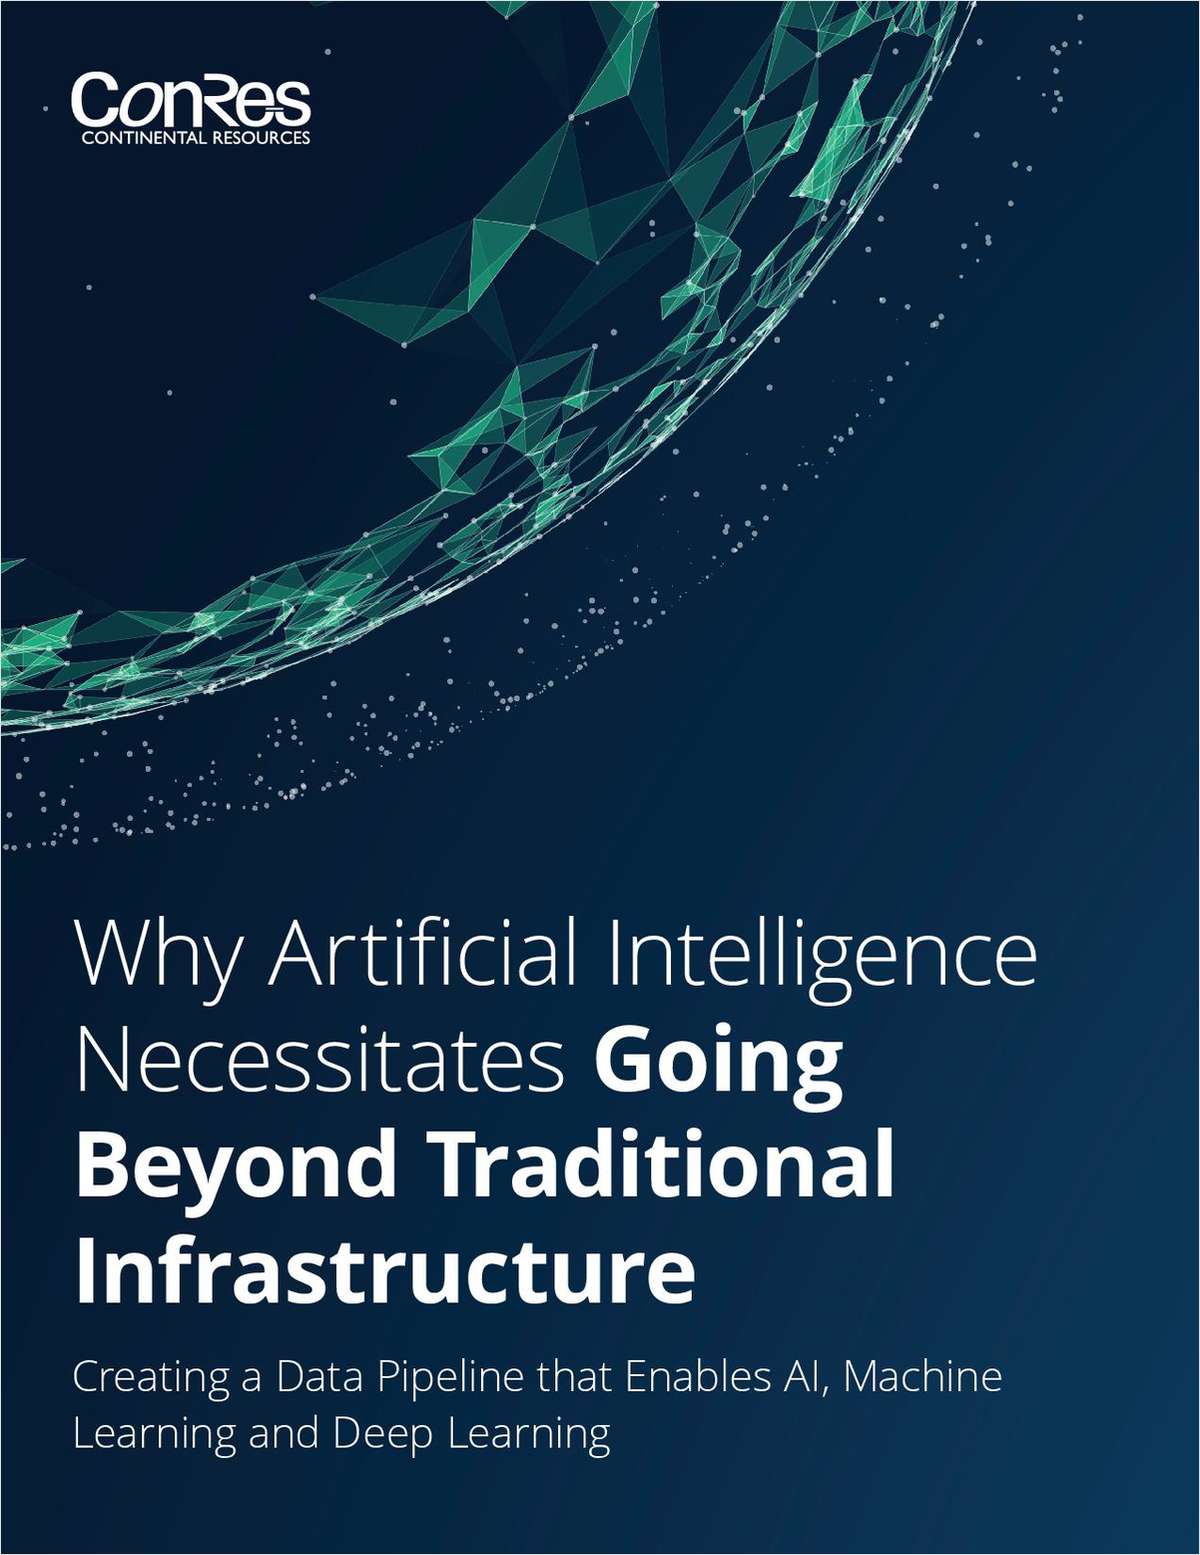 Why Artificial Intelligence Necessitates Going Beyond Traditional Infrastructure